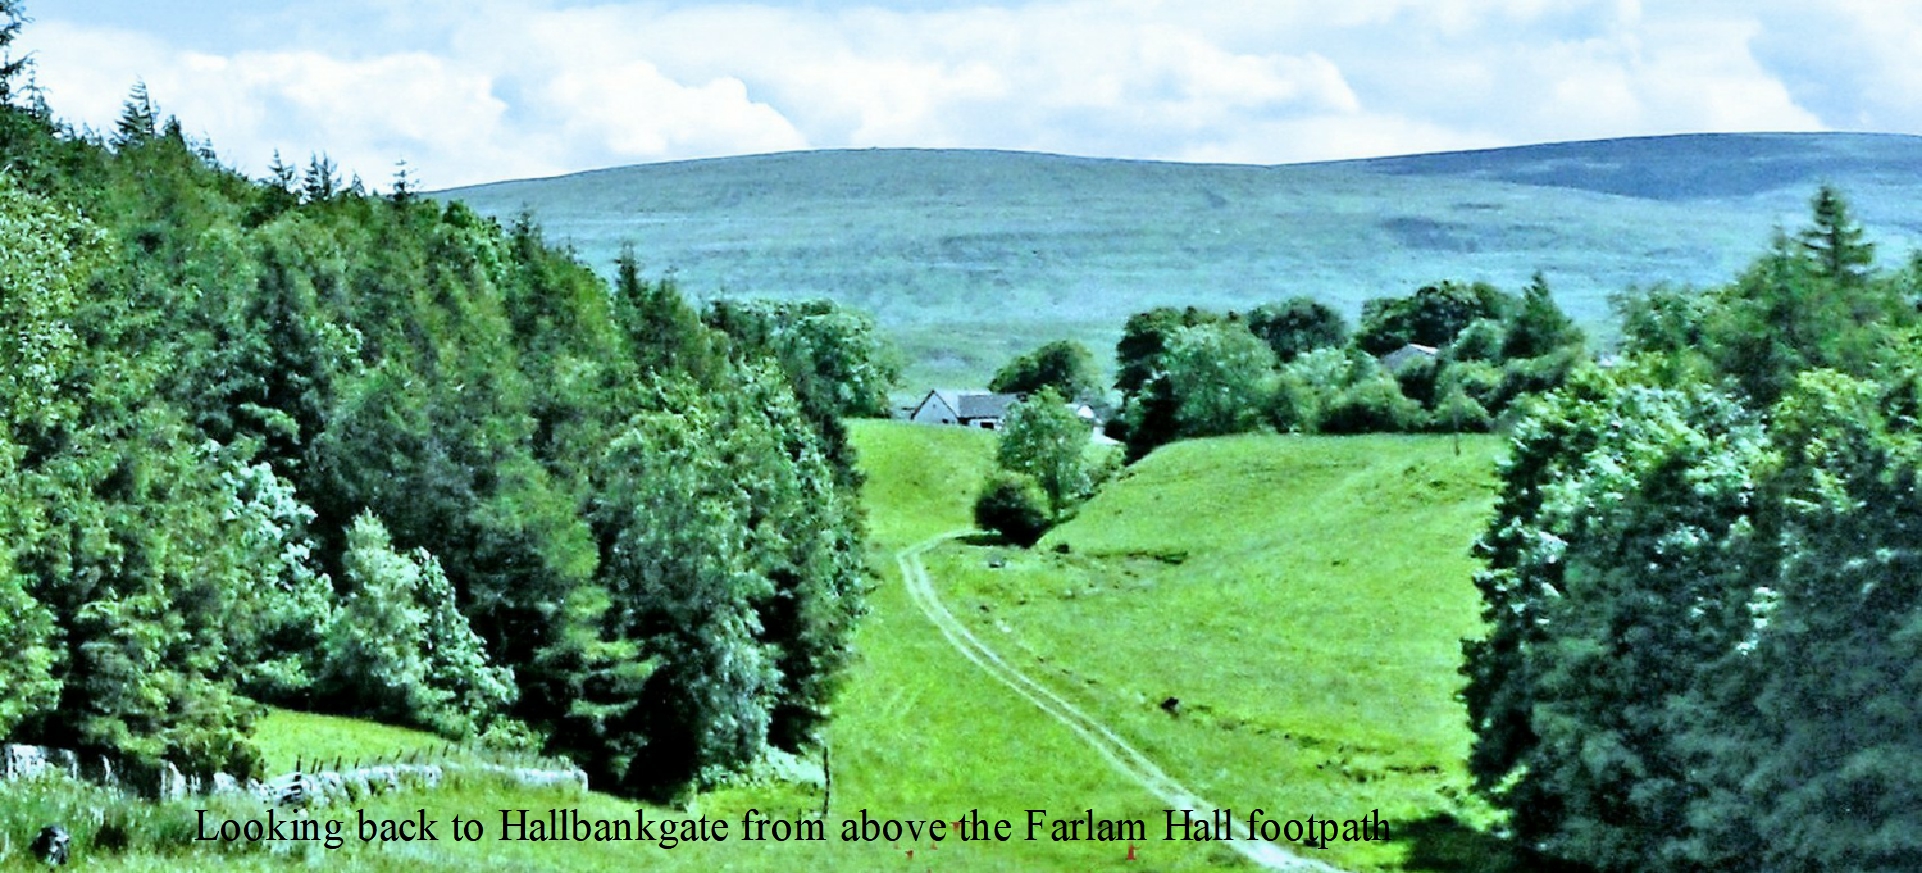 Looking back to Hallbankgate from Farlam Hall Footpath a_Fotor.jpg